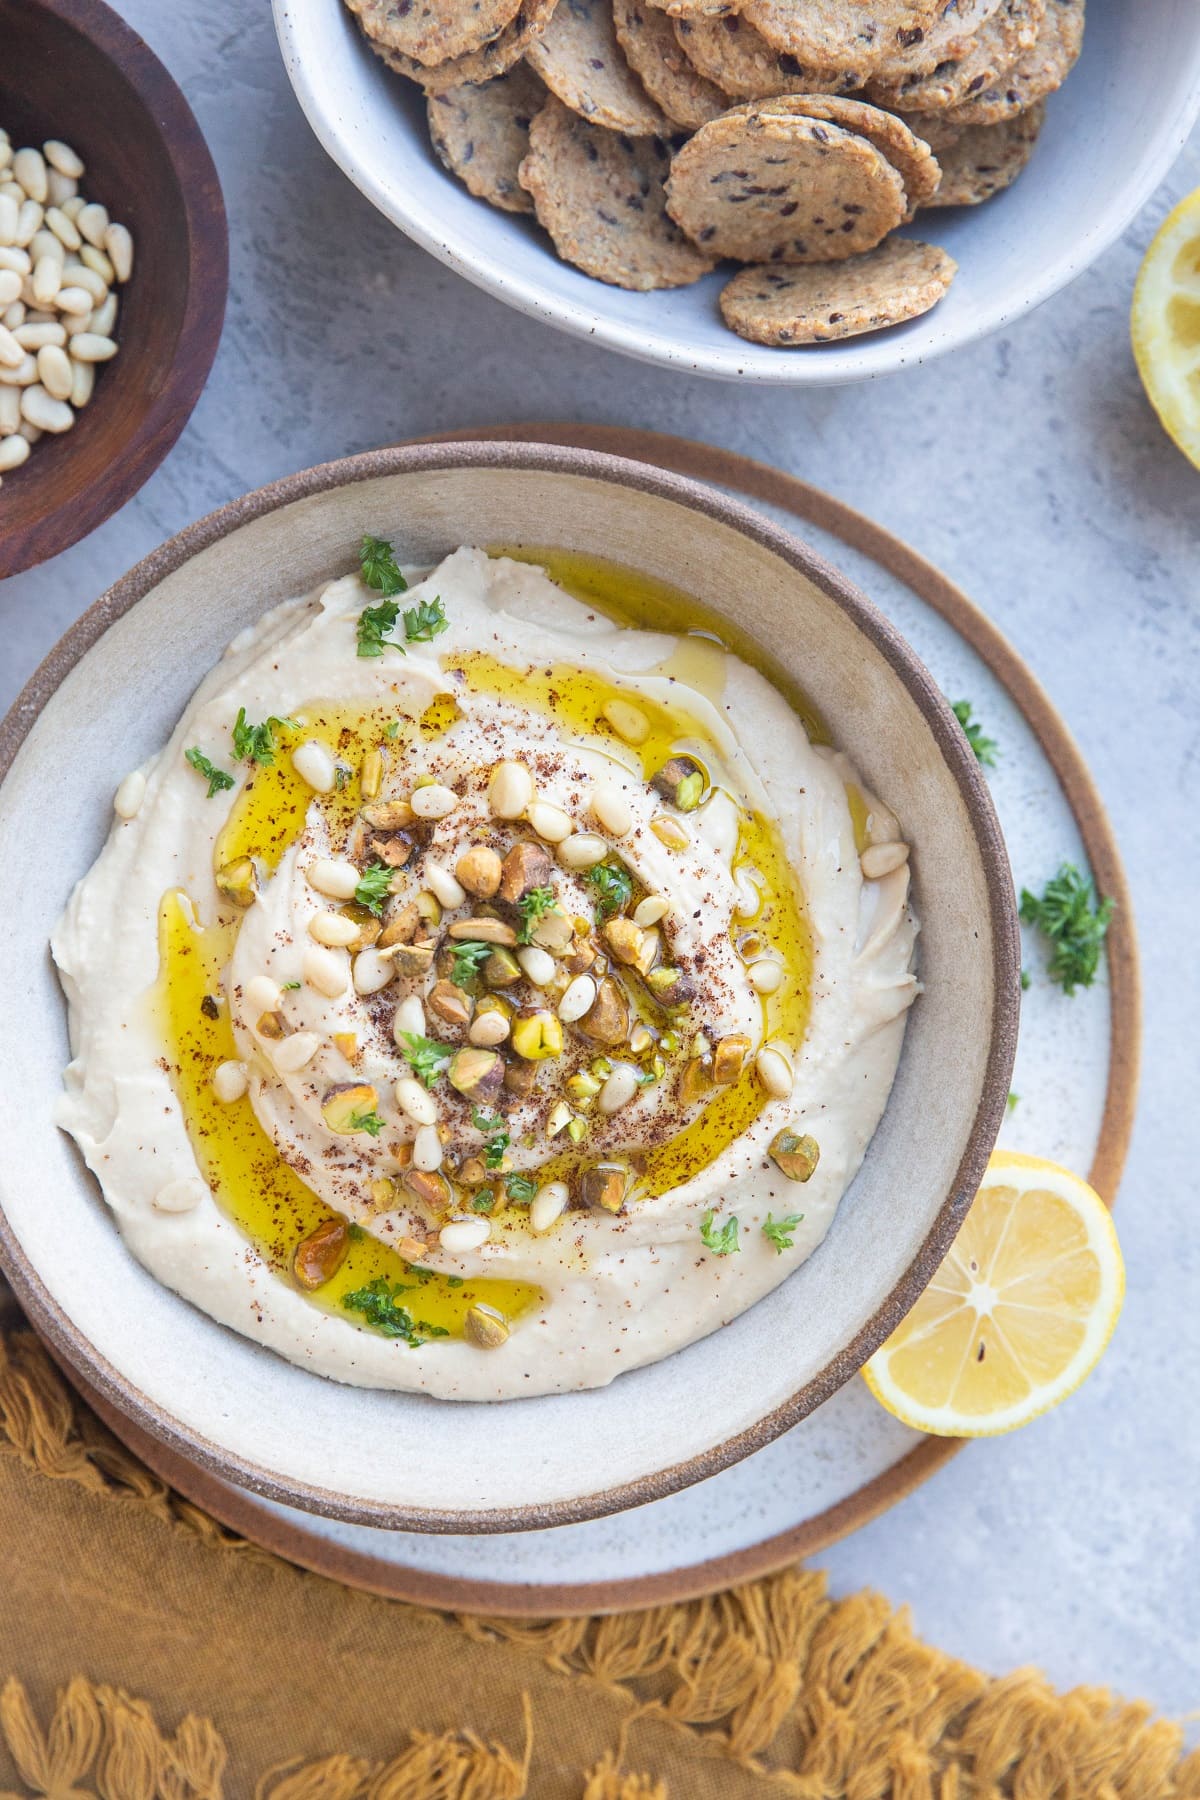 Bowl of hummus with pine nuts, pistachios and oil on top with a bowl of crackers to the side.